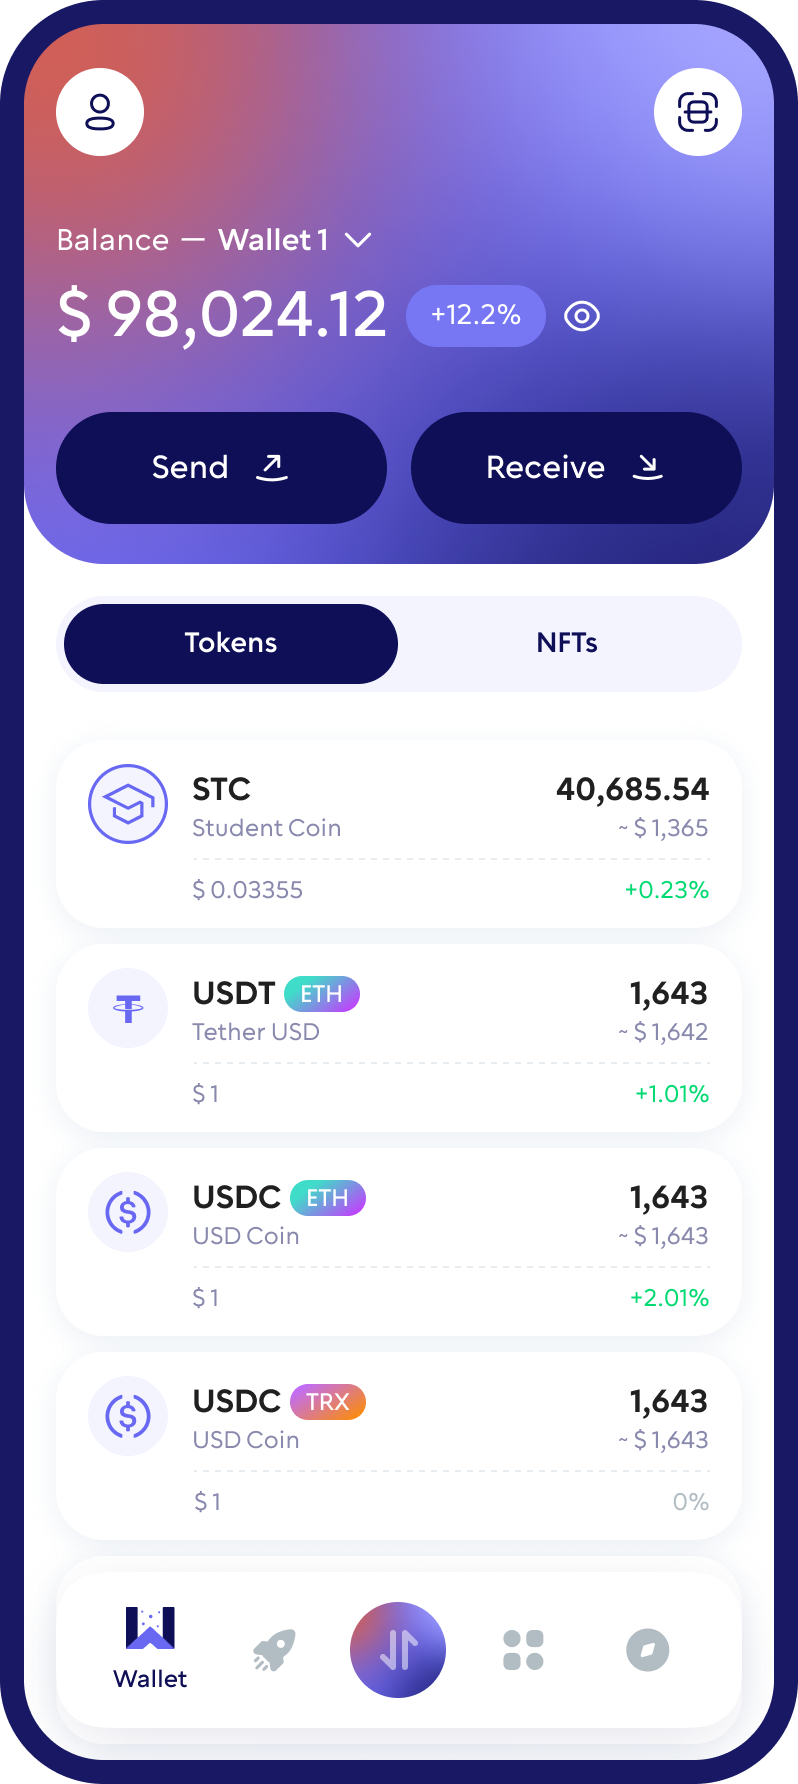 Student Coin (STC) Cryptocurrency Wallet Walletverse